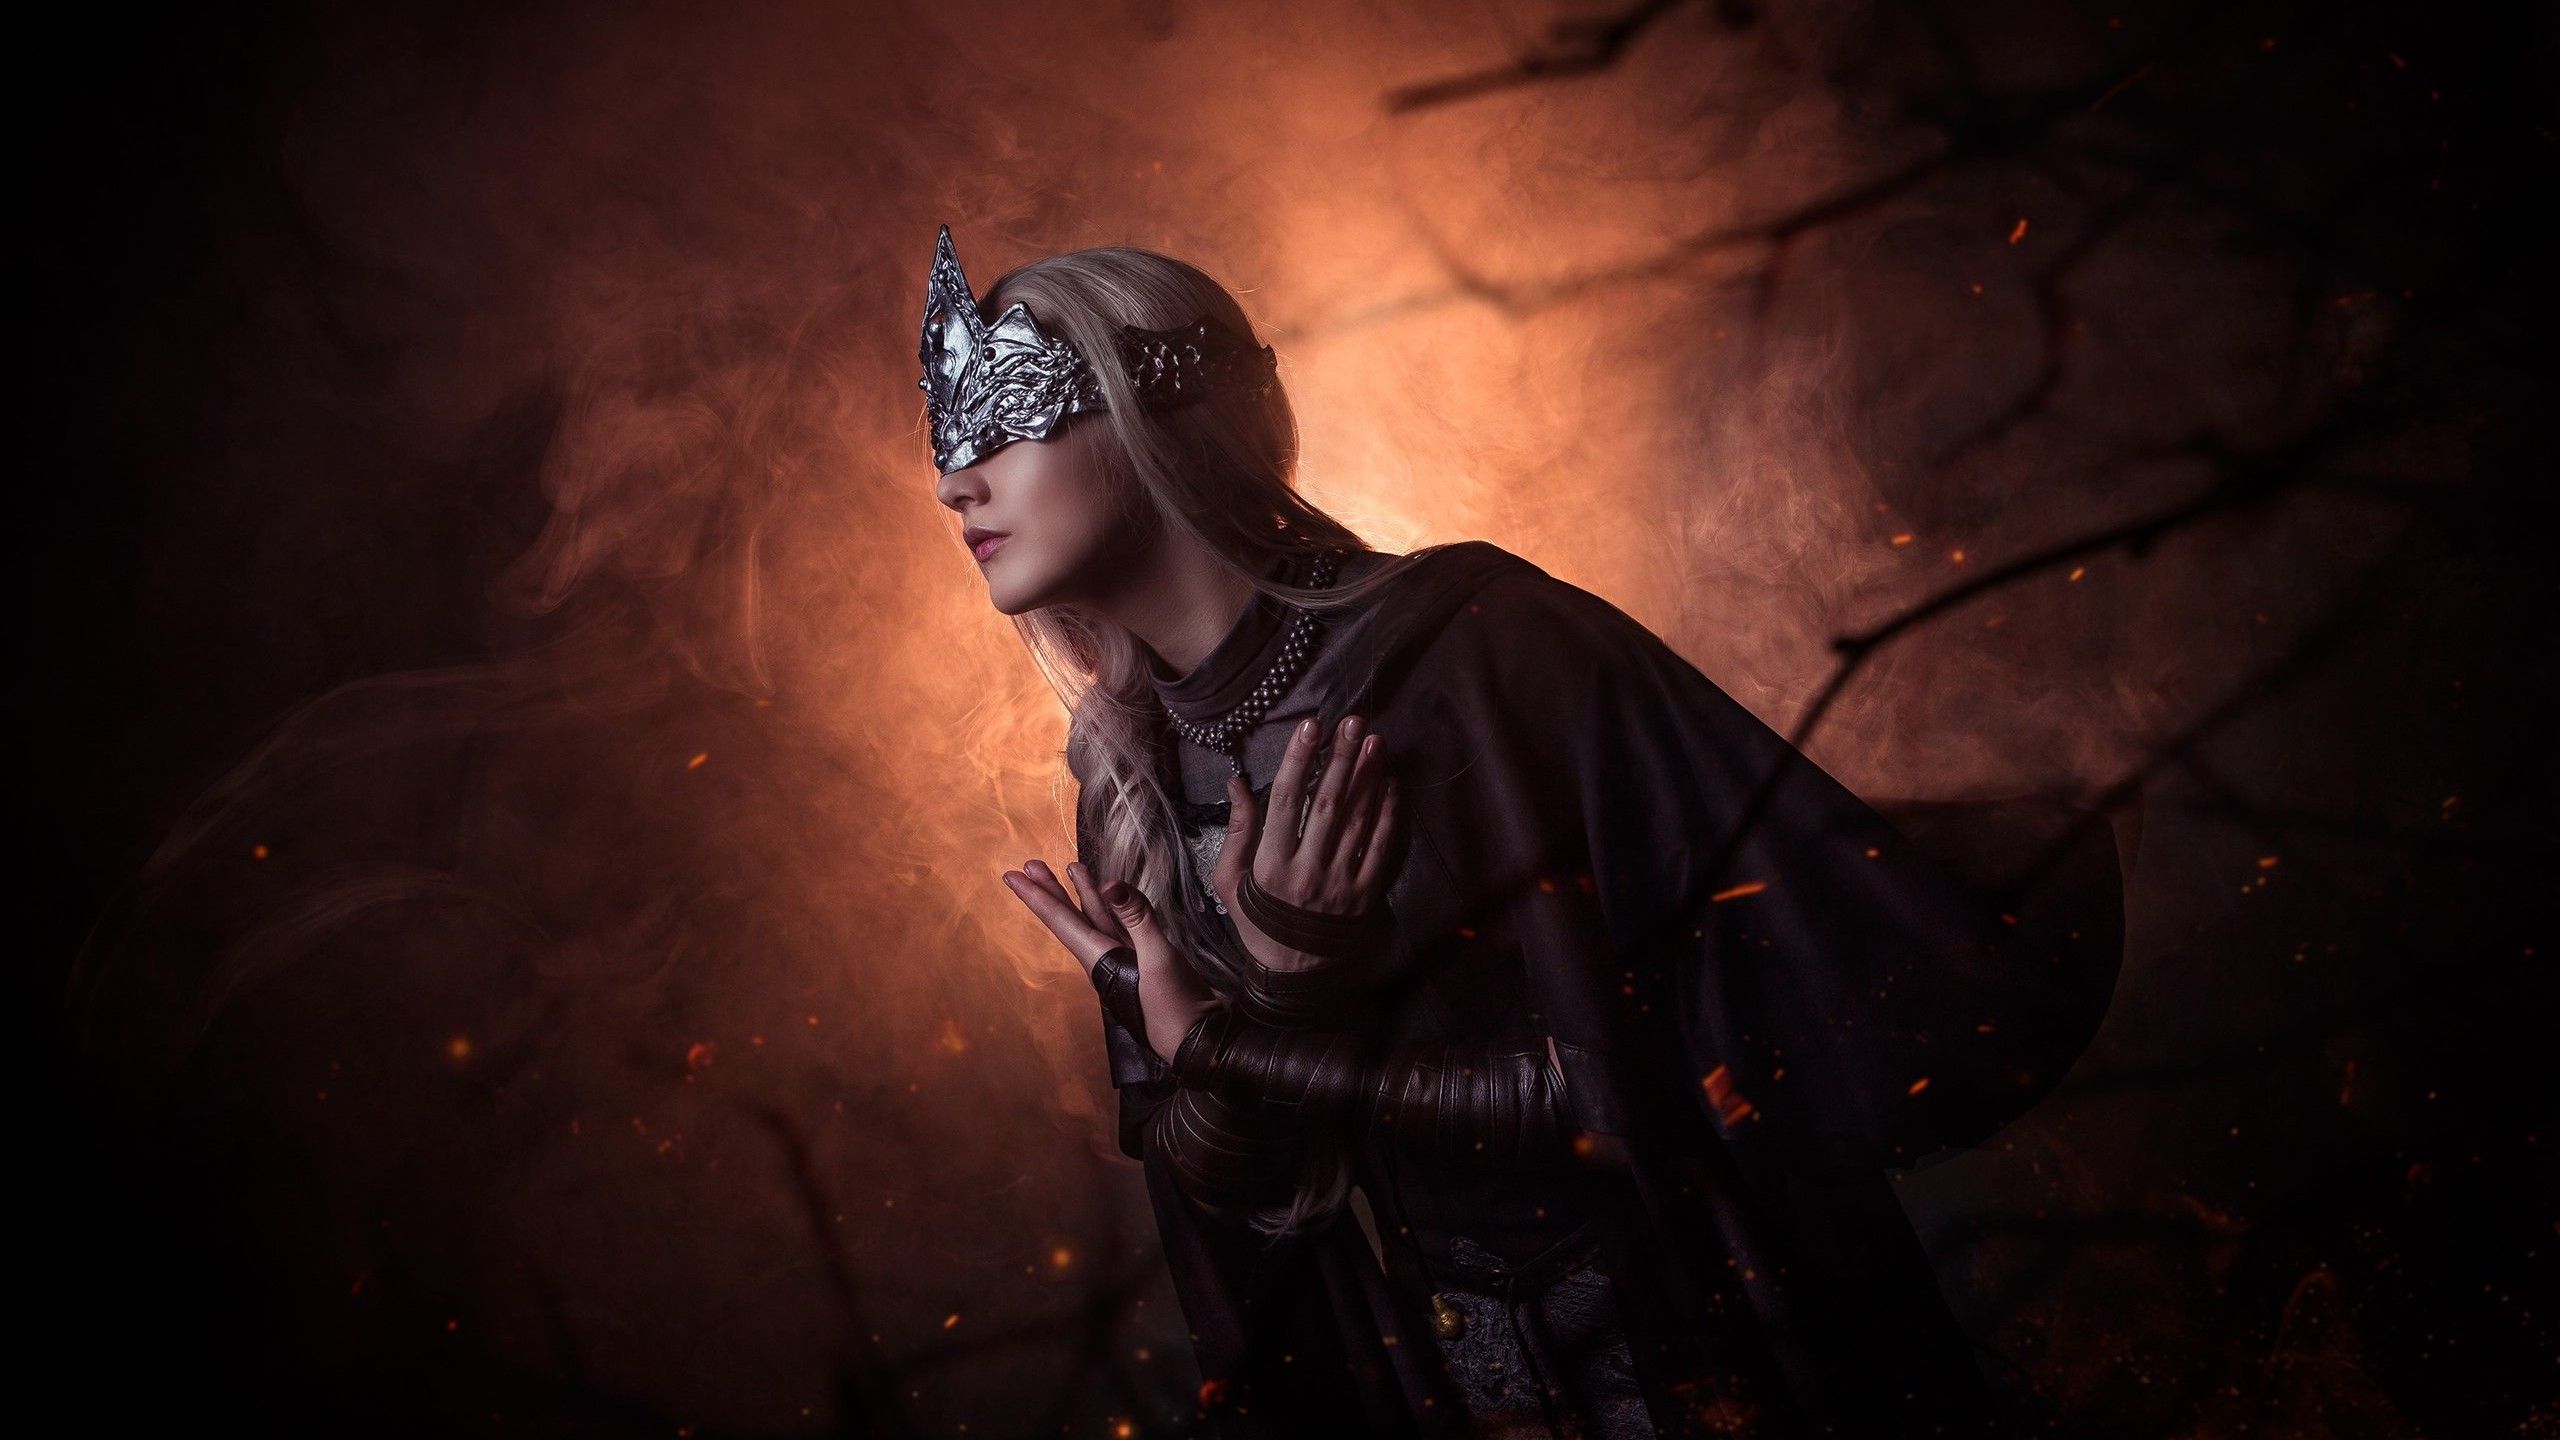 Wallpaper Fire keeper, Cosplay, Dark Souls Fantasy,. Wallpaper for iPhone, Android, Mobile and Desktop